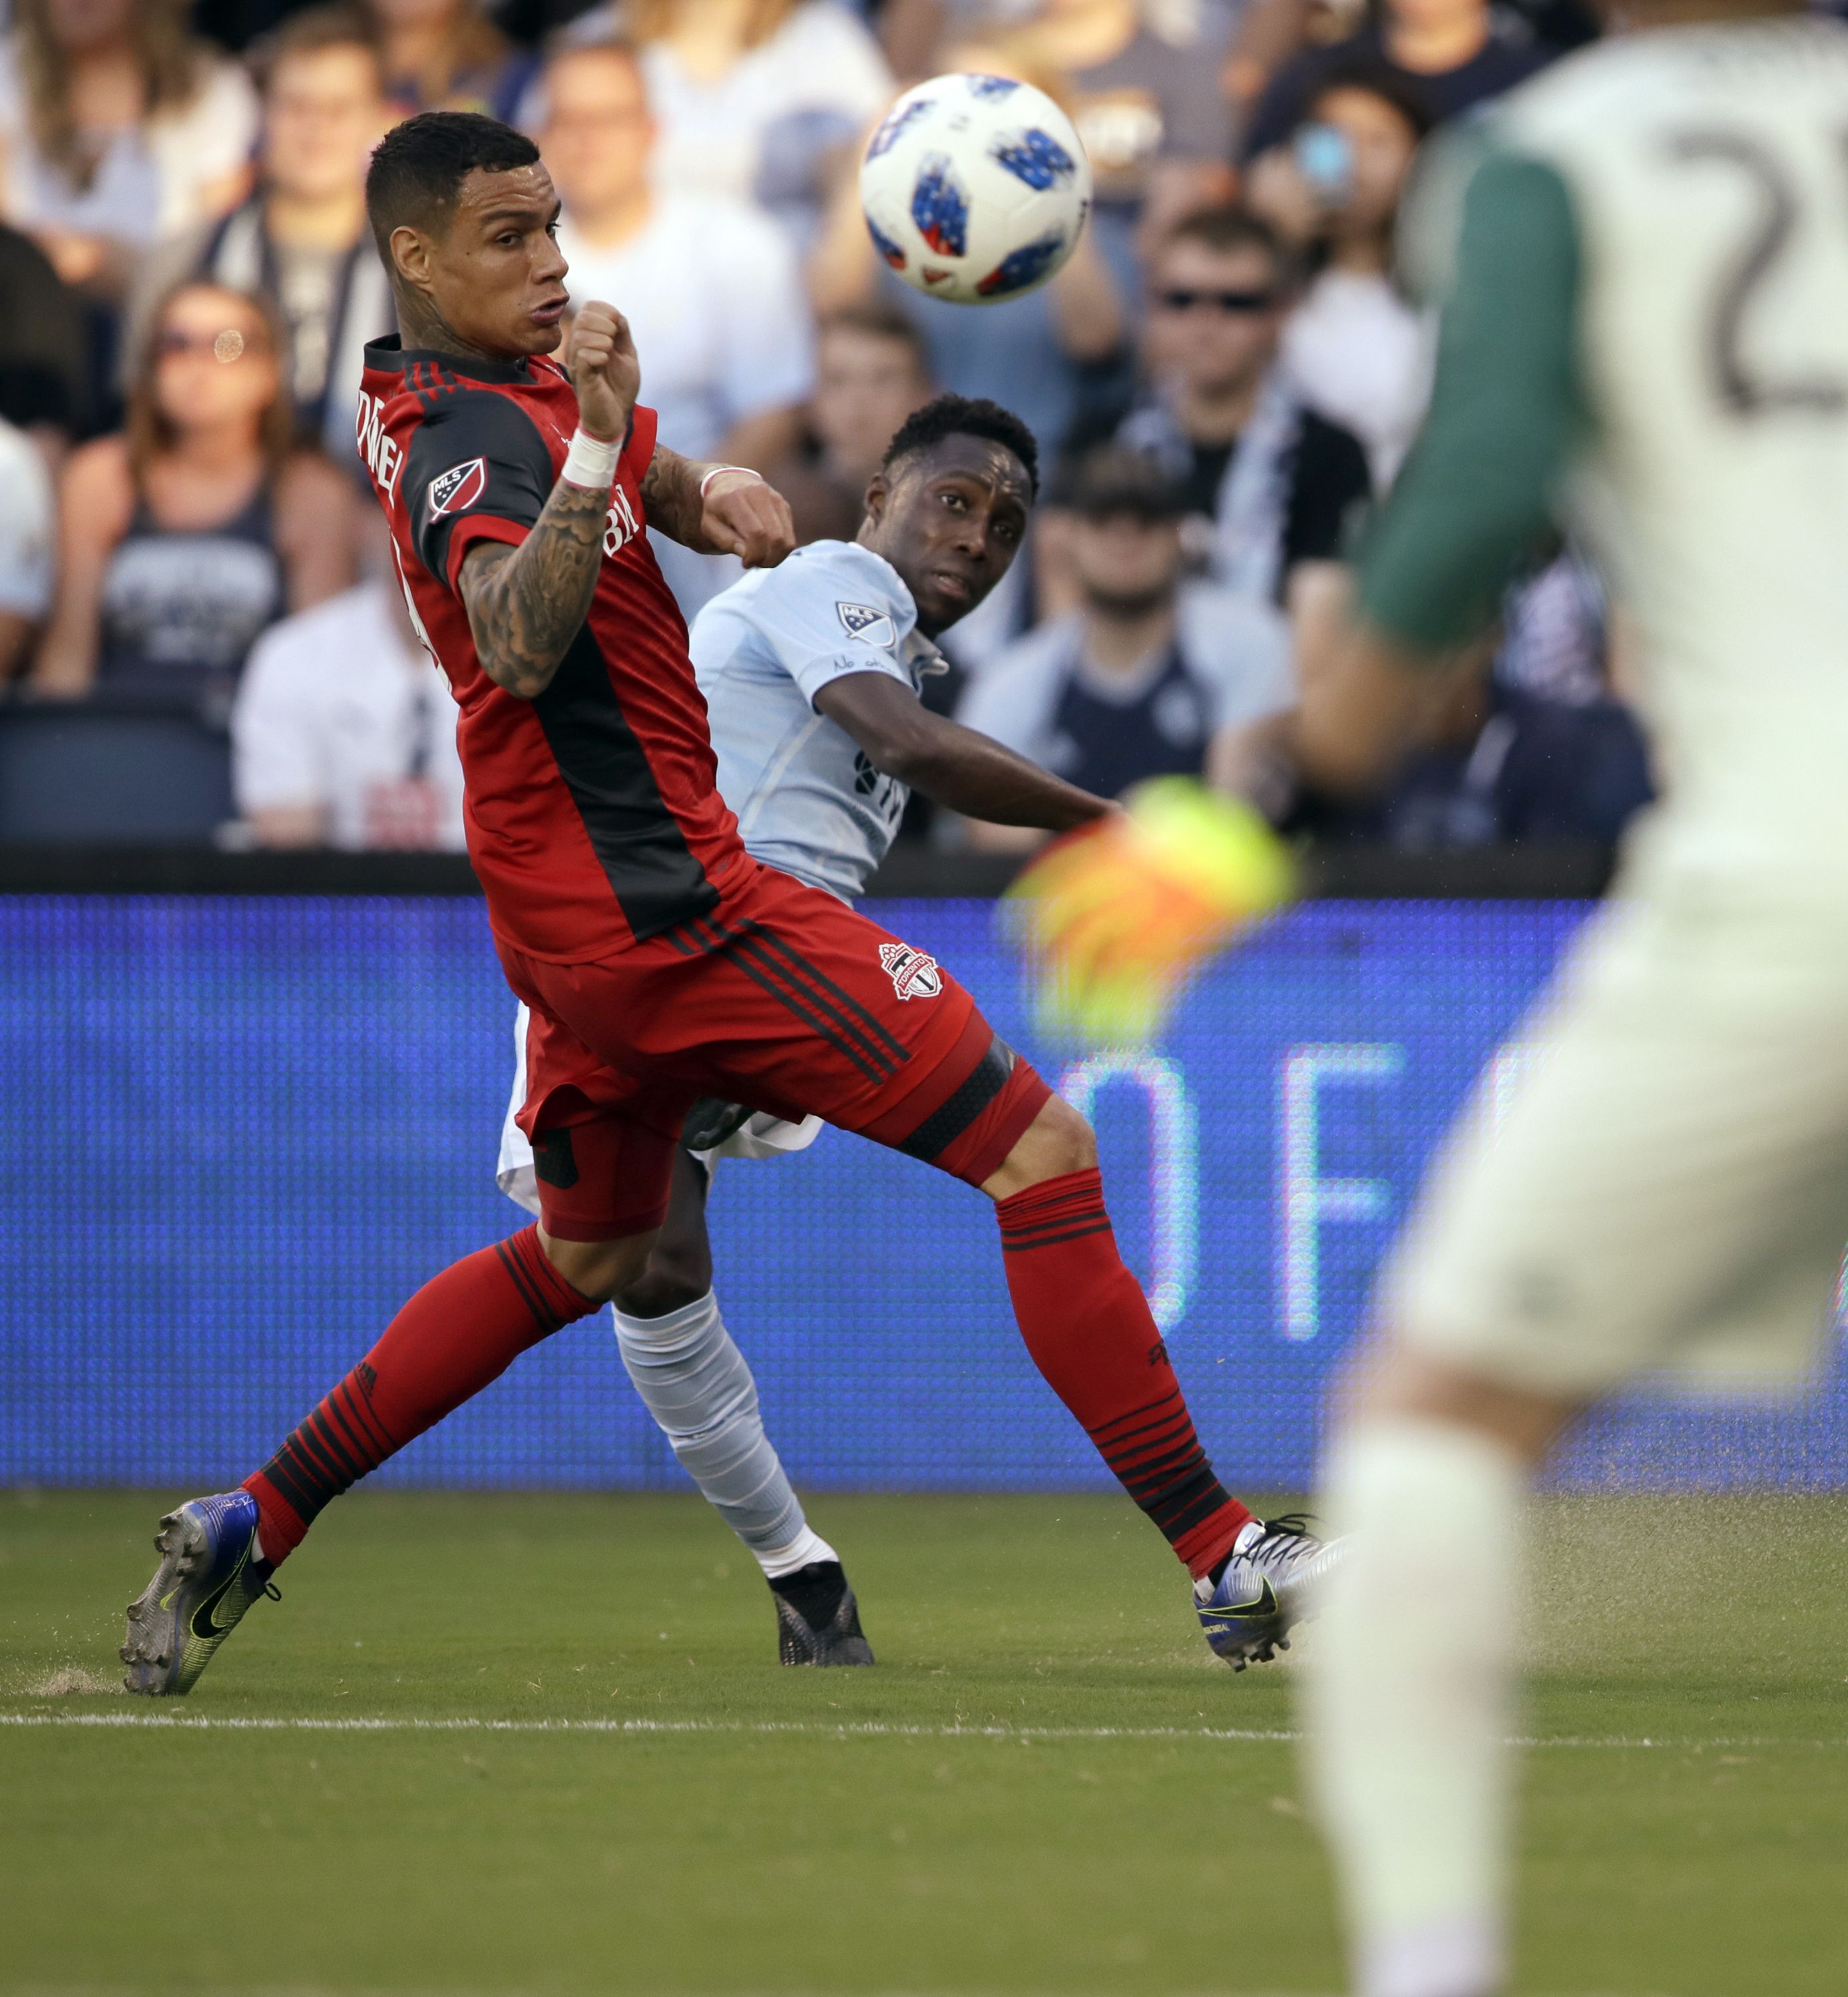 Toronto FC: 7 things to know about Gregory van der Wiel